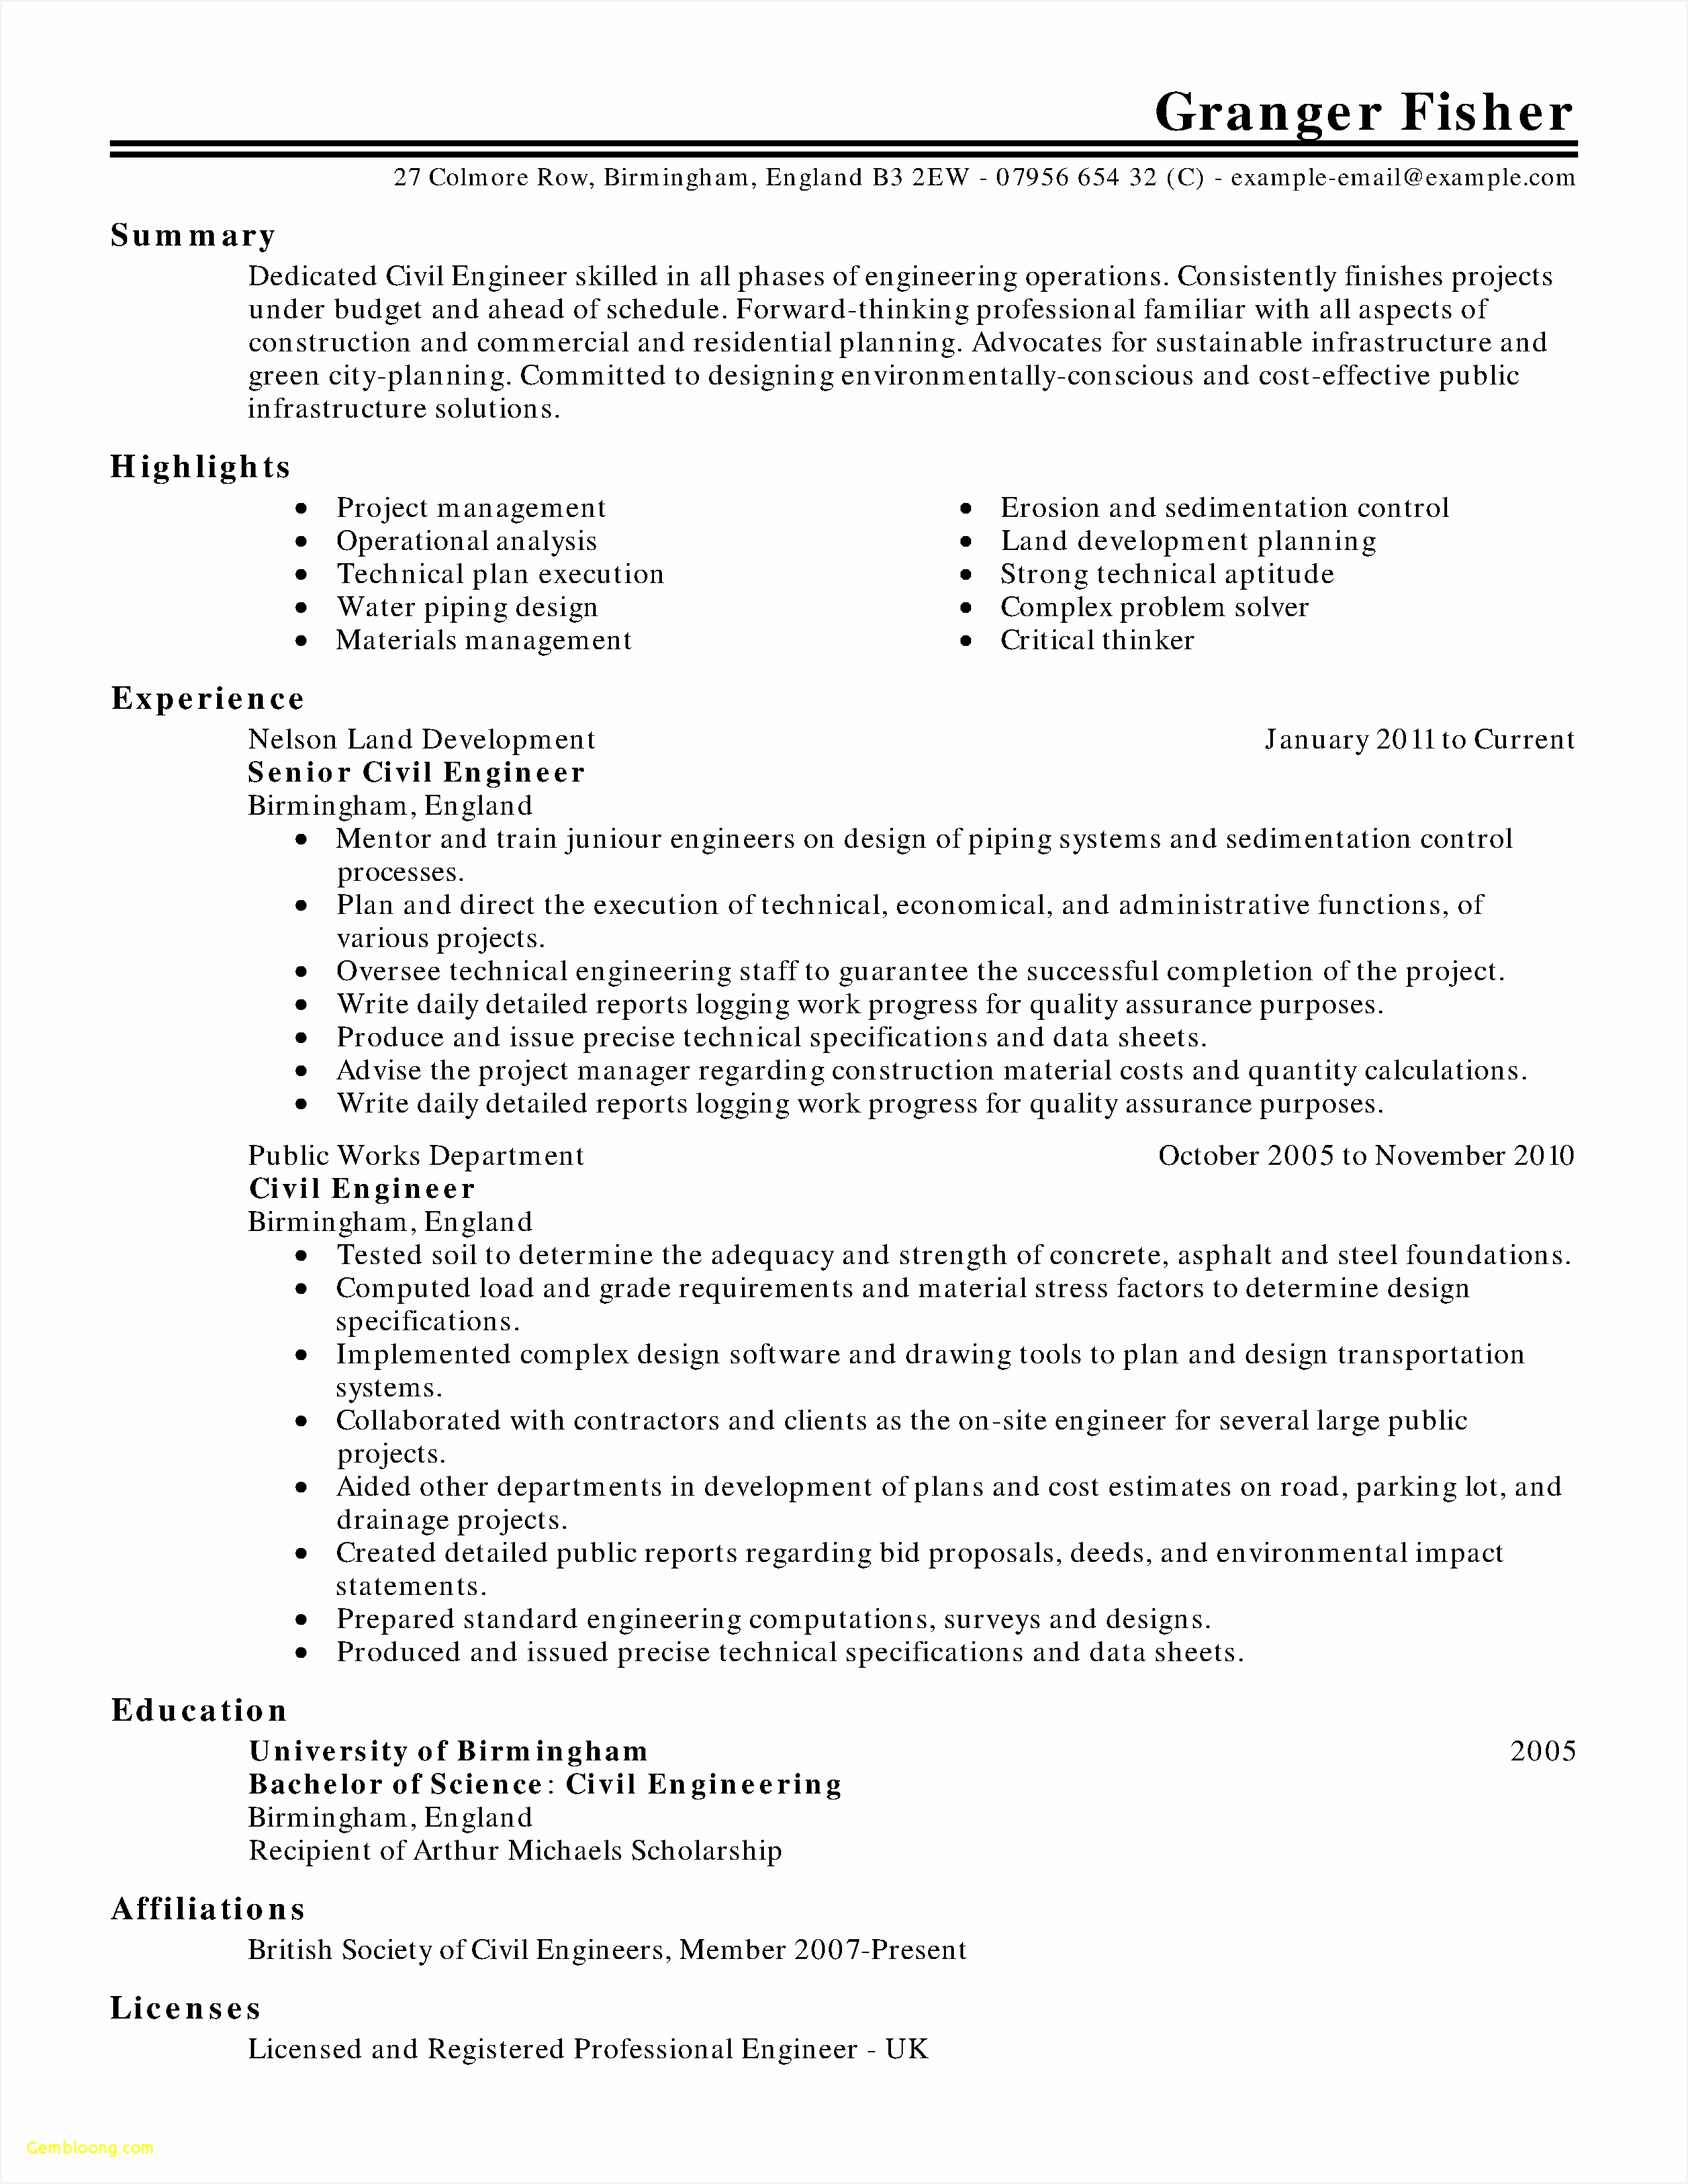 Resume format Download Free New Resume format for Students Free Download Lovely Od Specialist Sample33002550